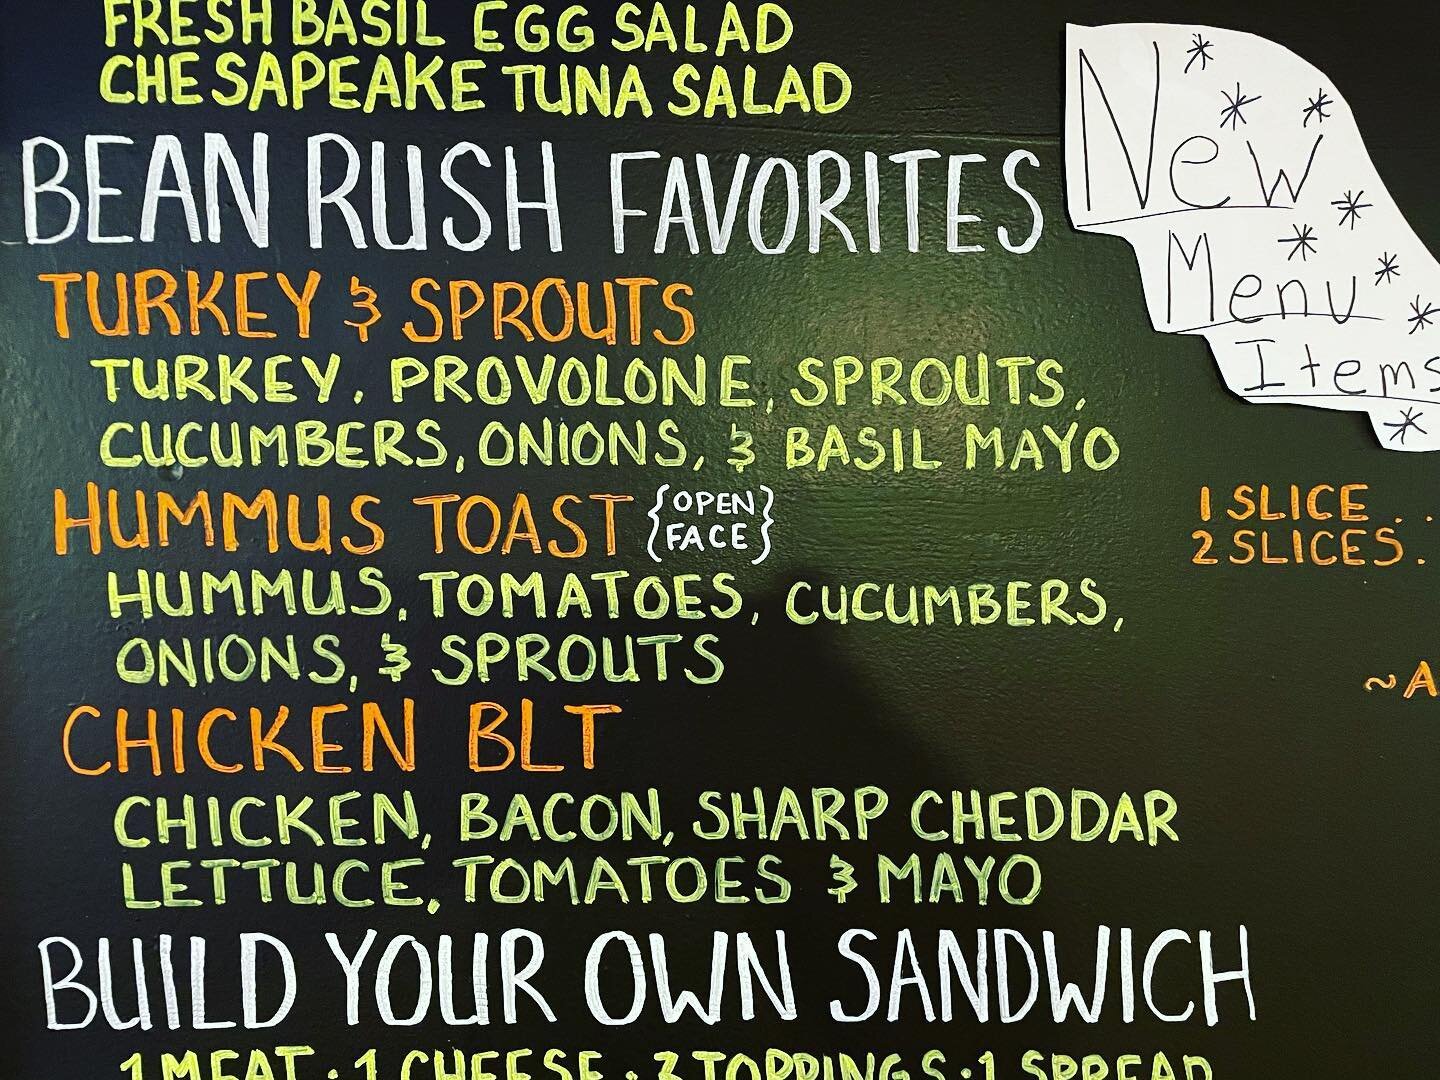 New menu items in Crownsville(already in Annapolis). Try all three you will love them!
#beanrush #beanrushcafe #annapolis #westannapolis #crownsville #bwmcbr #cafe #coffee #newitems #sprouts #hummus #bacon